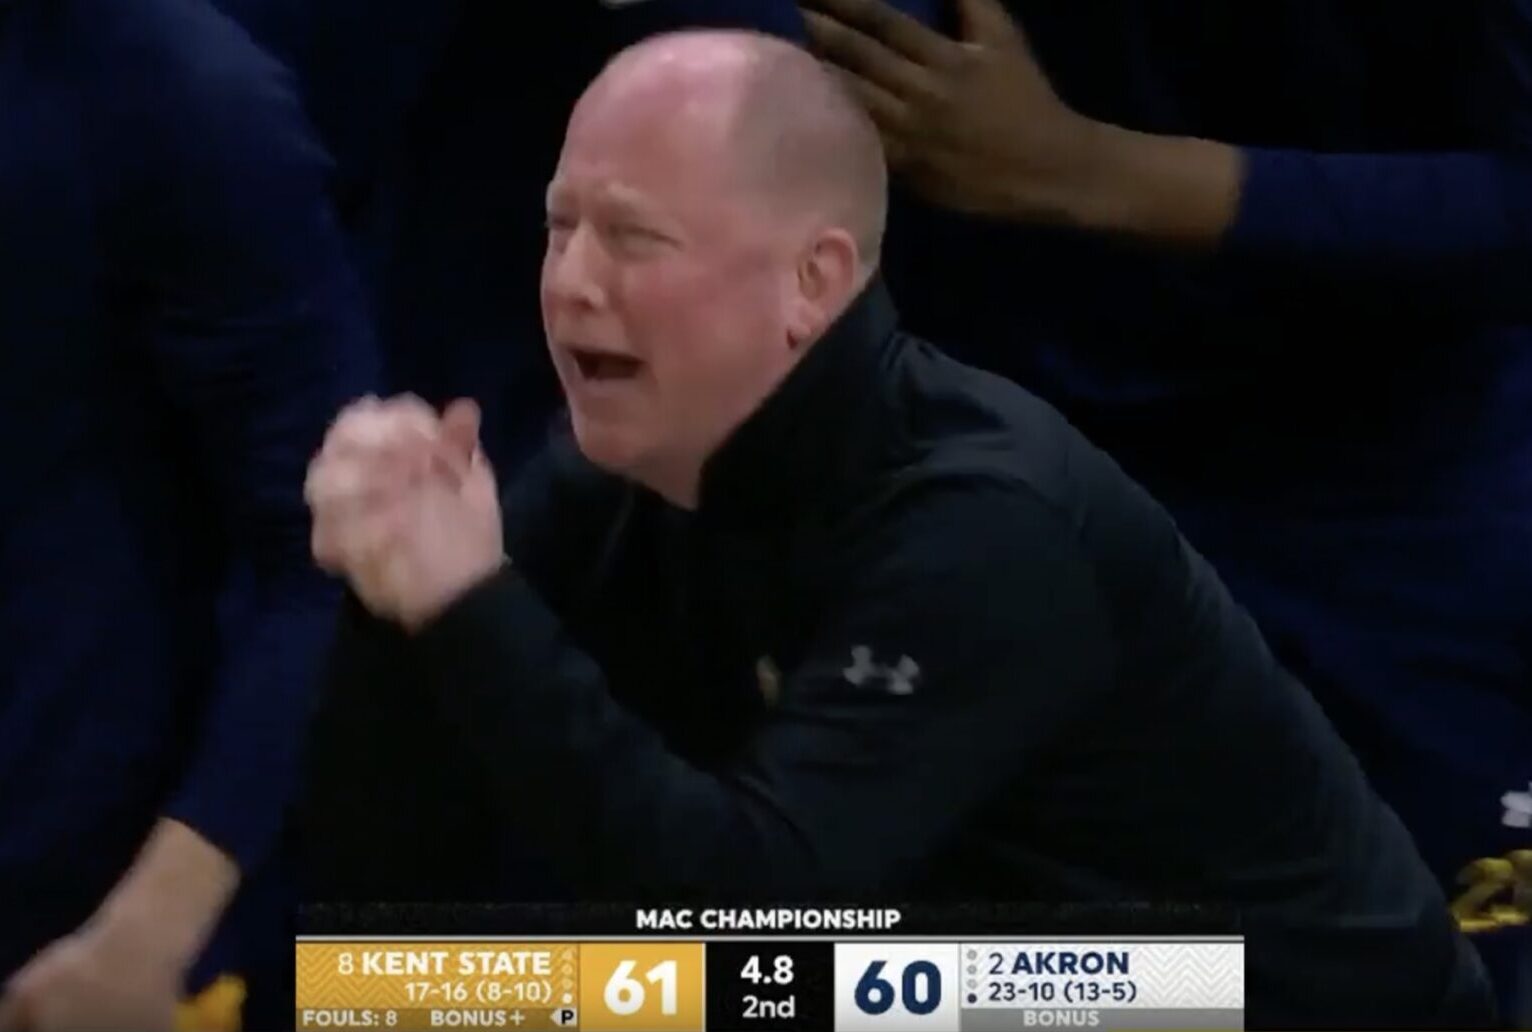 WATCH: Kent State Player Has a Jawdropping Mental Lapse at the Absolute Worst Moment and Costs His Team an NCAA Tourney Bid